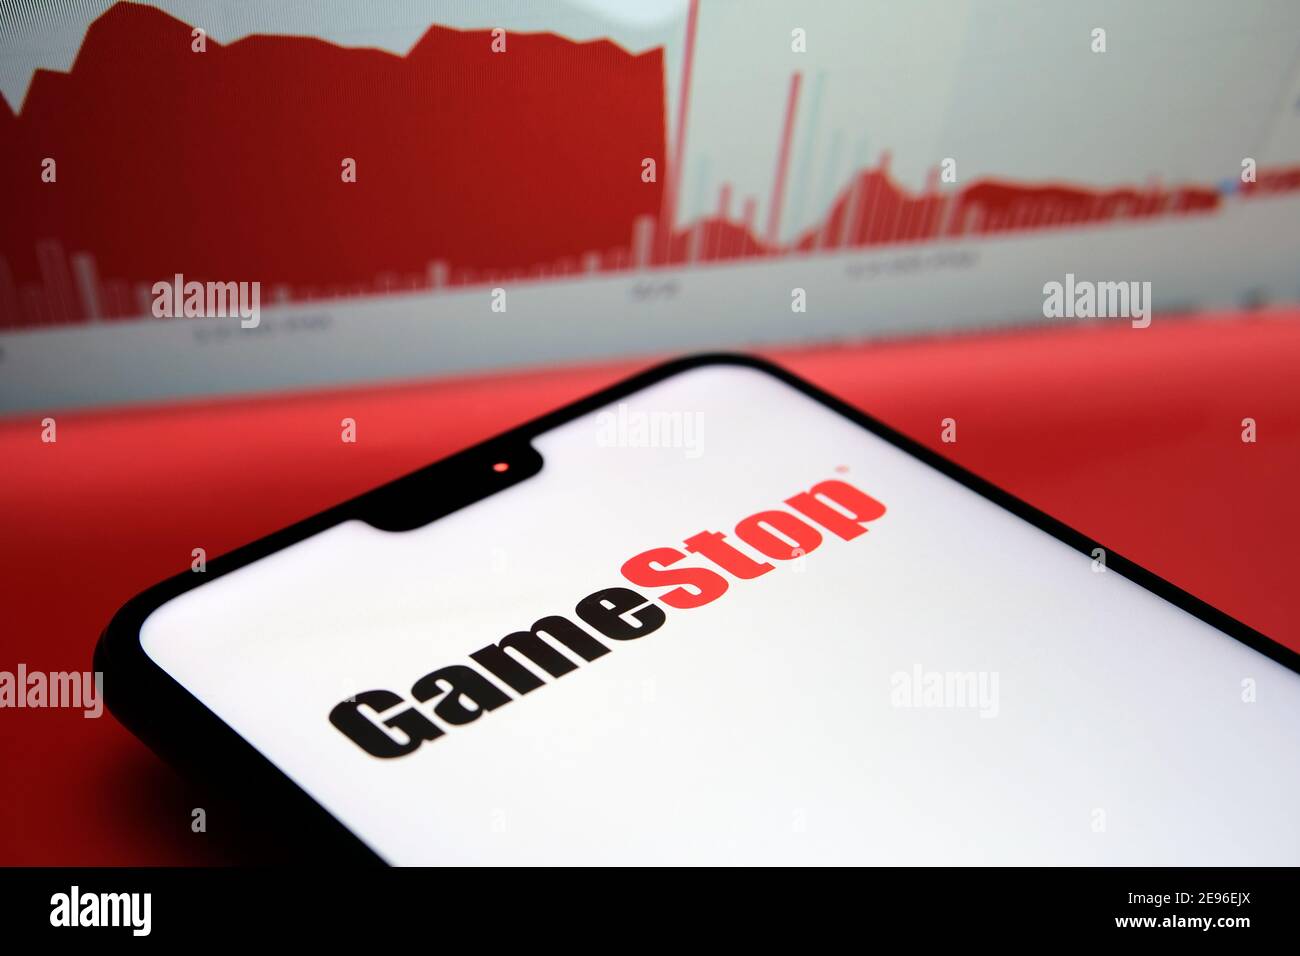 GameStop Corp logo seen on the smartphone and the real chart of GameStop shares (as of 02.02.2021) with the huge plunge seen on the blurred background Stock Photo